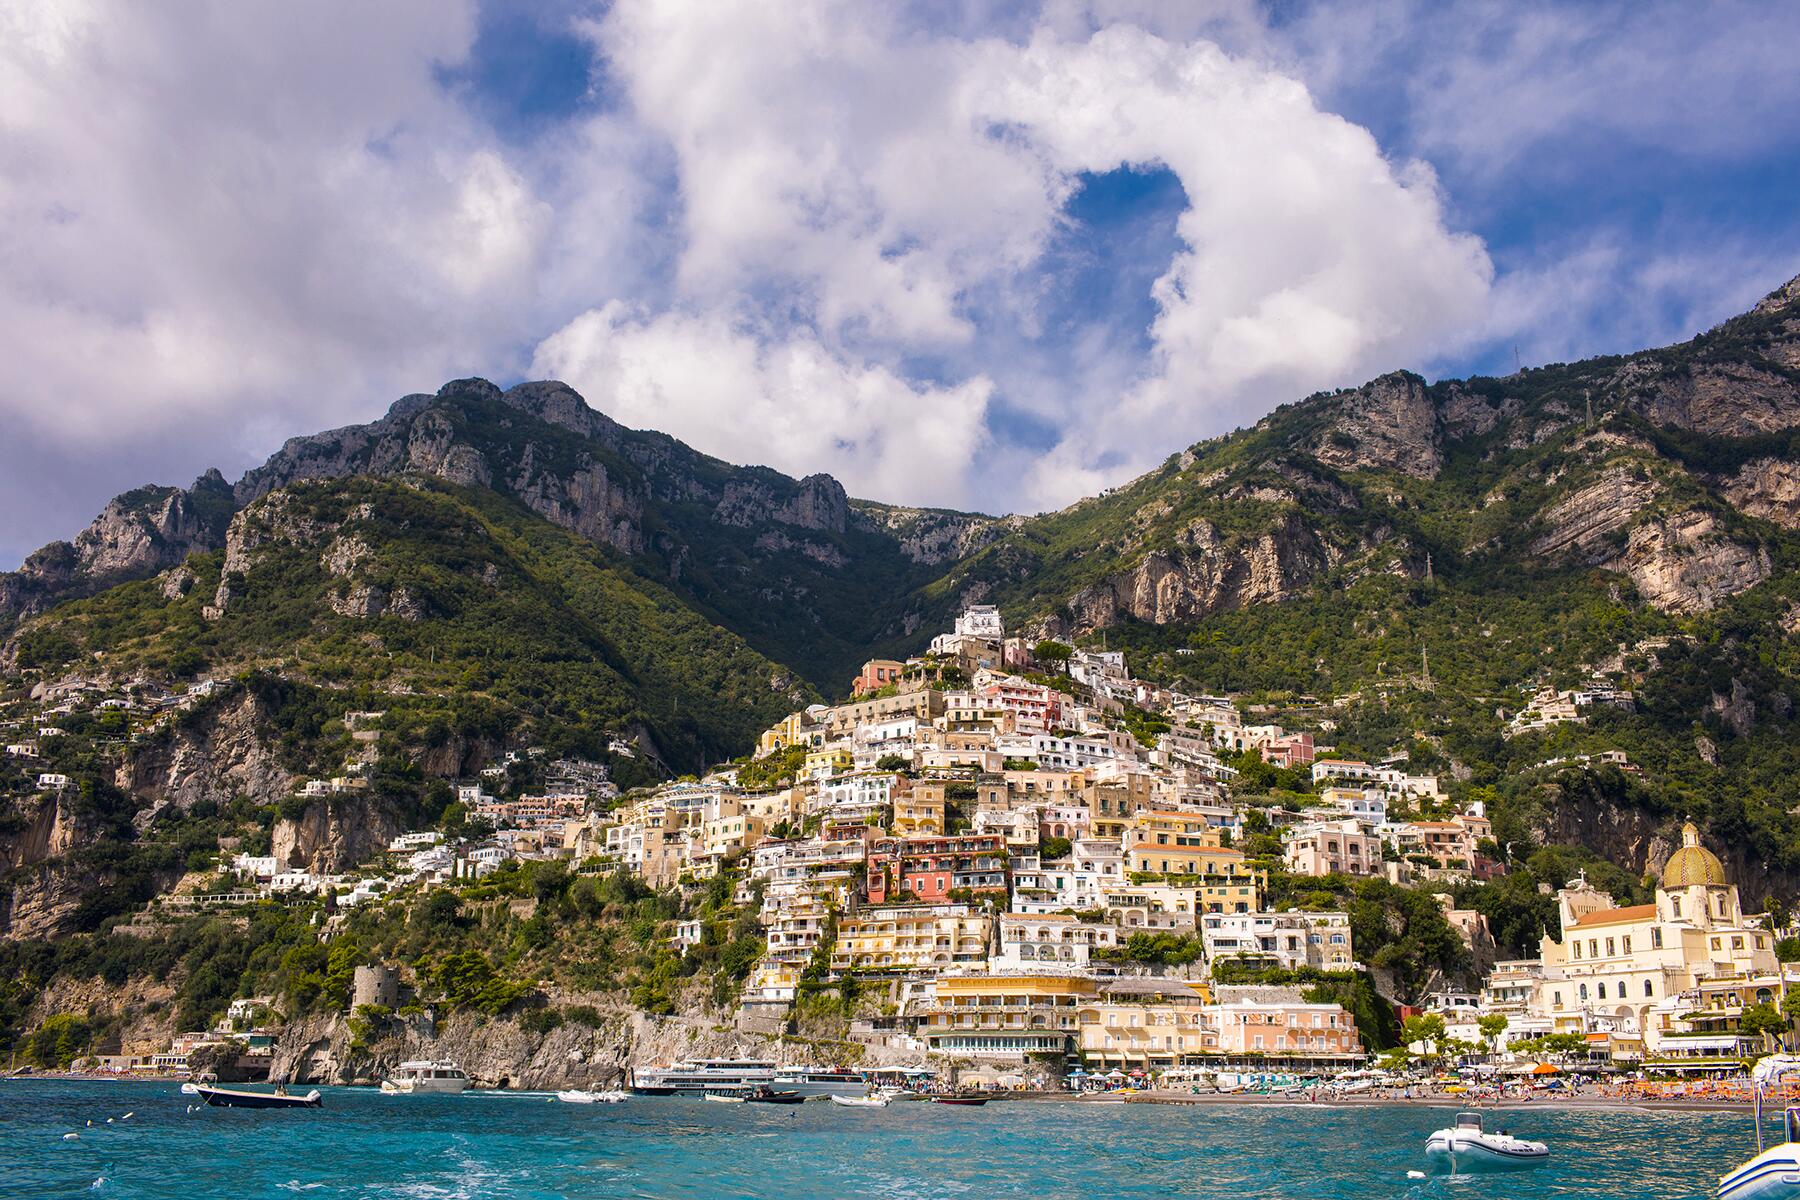 Amalfi Coast Travel Guide - Expert Picks for your Vacation | Fodor’s Travel